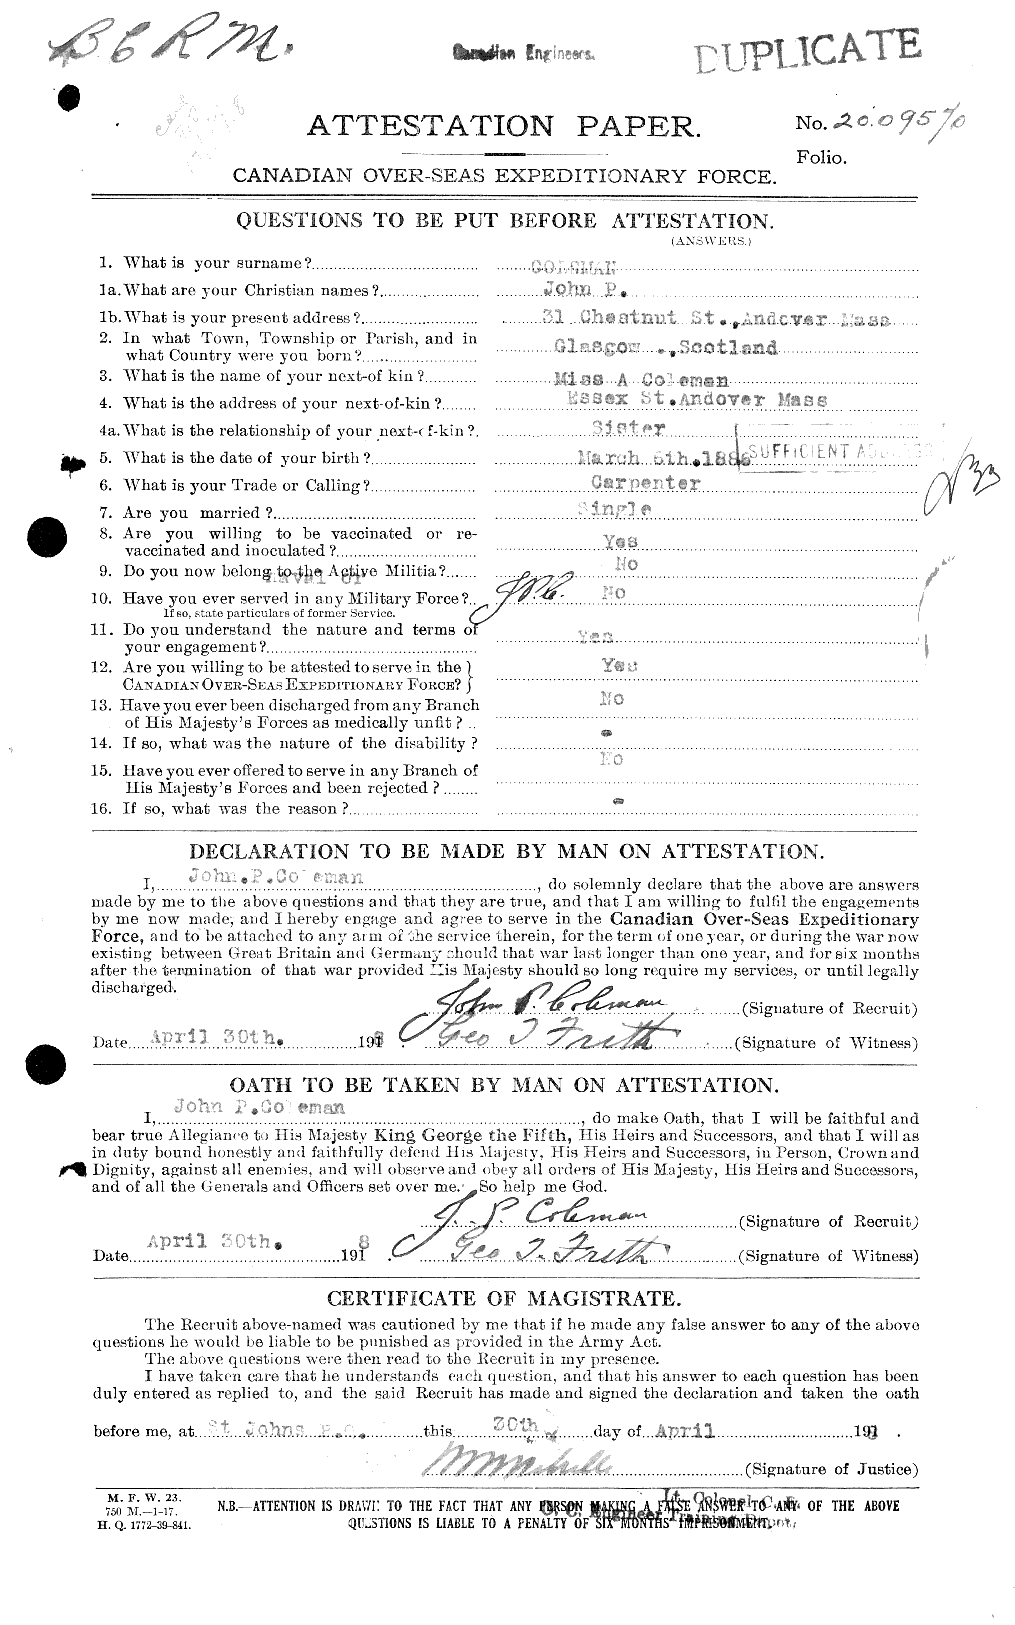 Personnel Records of the First World War - CEF 028218a